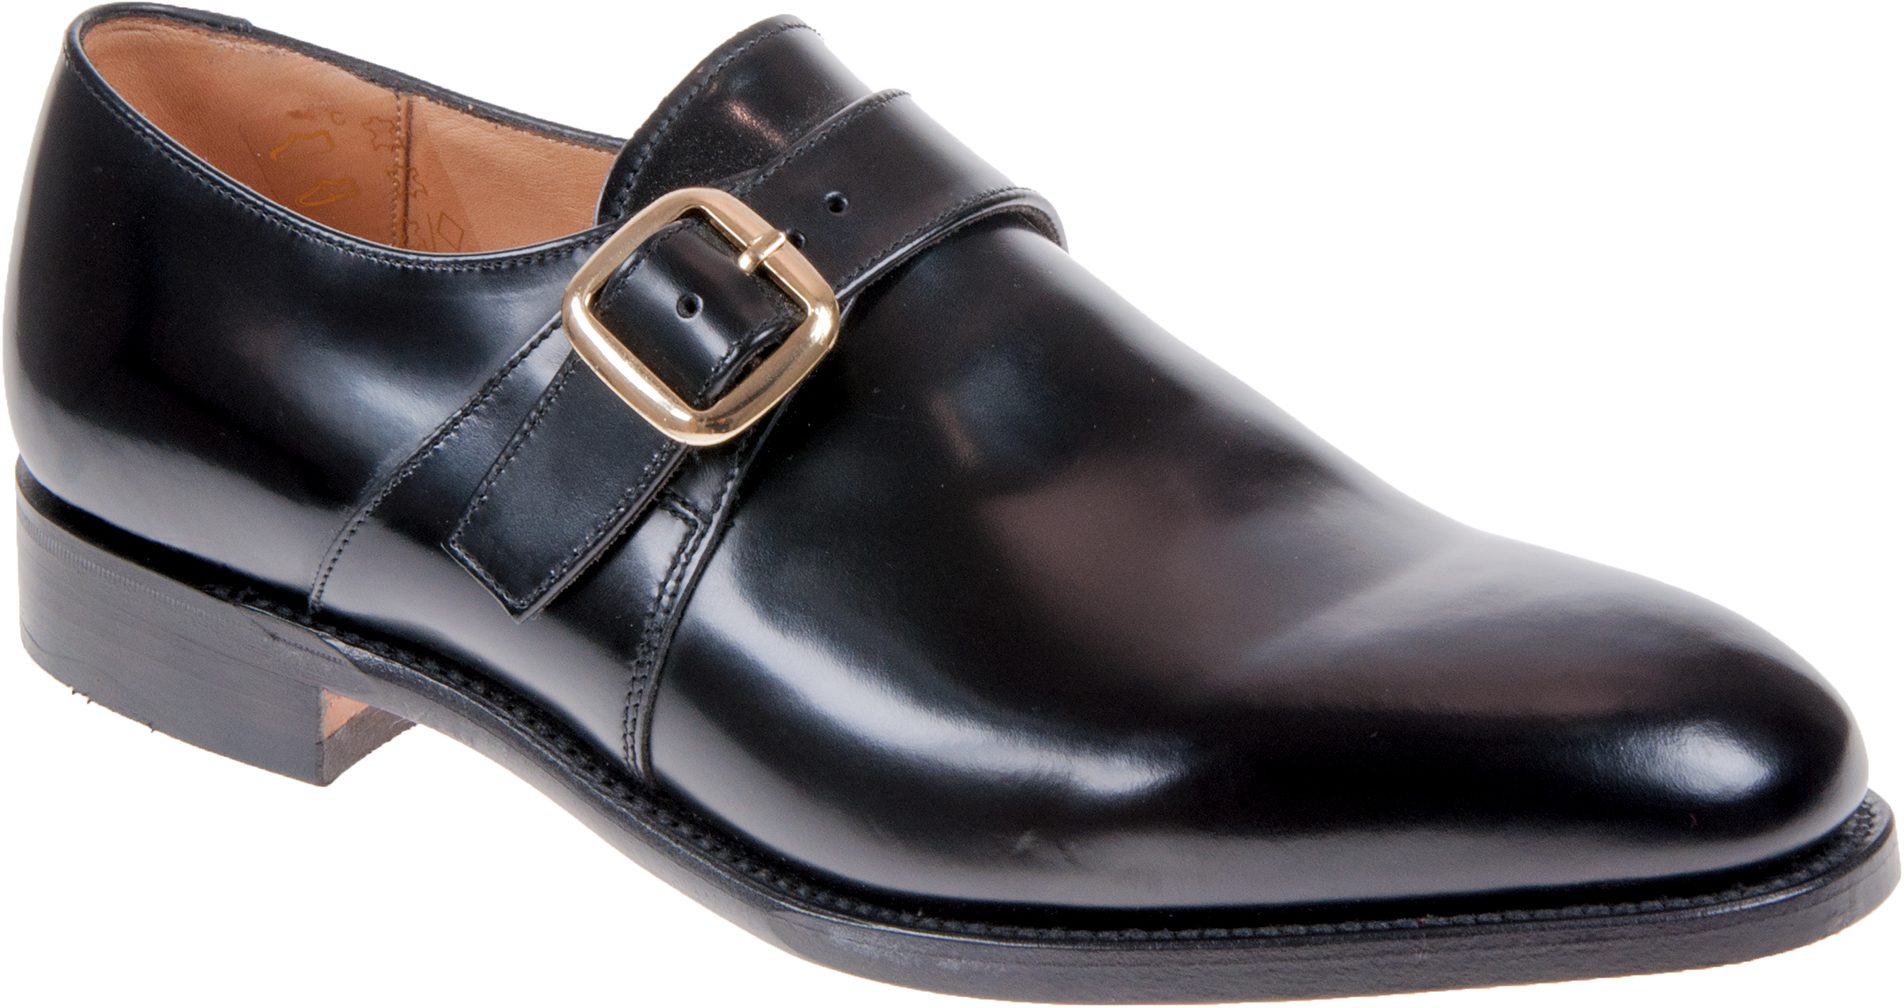 Loake Paisley Black Polished Leather - Formal Shoes - Humphries Shoes